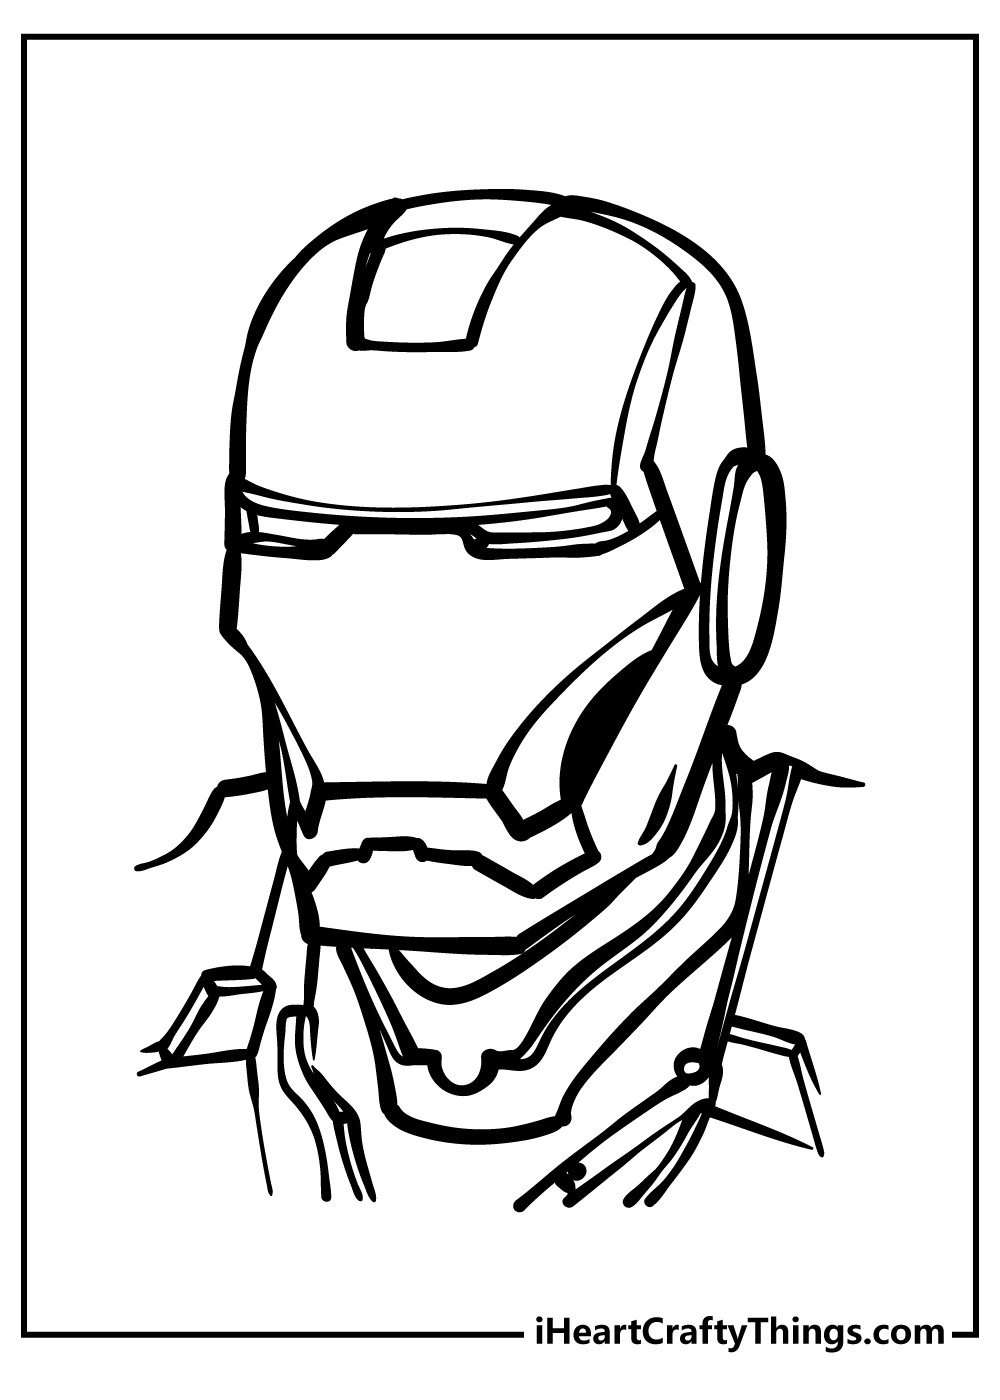 Iron Man’s head coloring pages